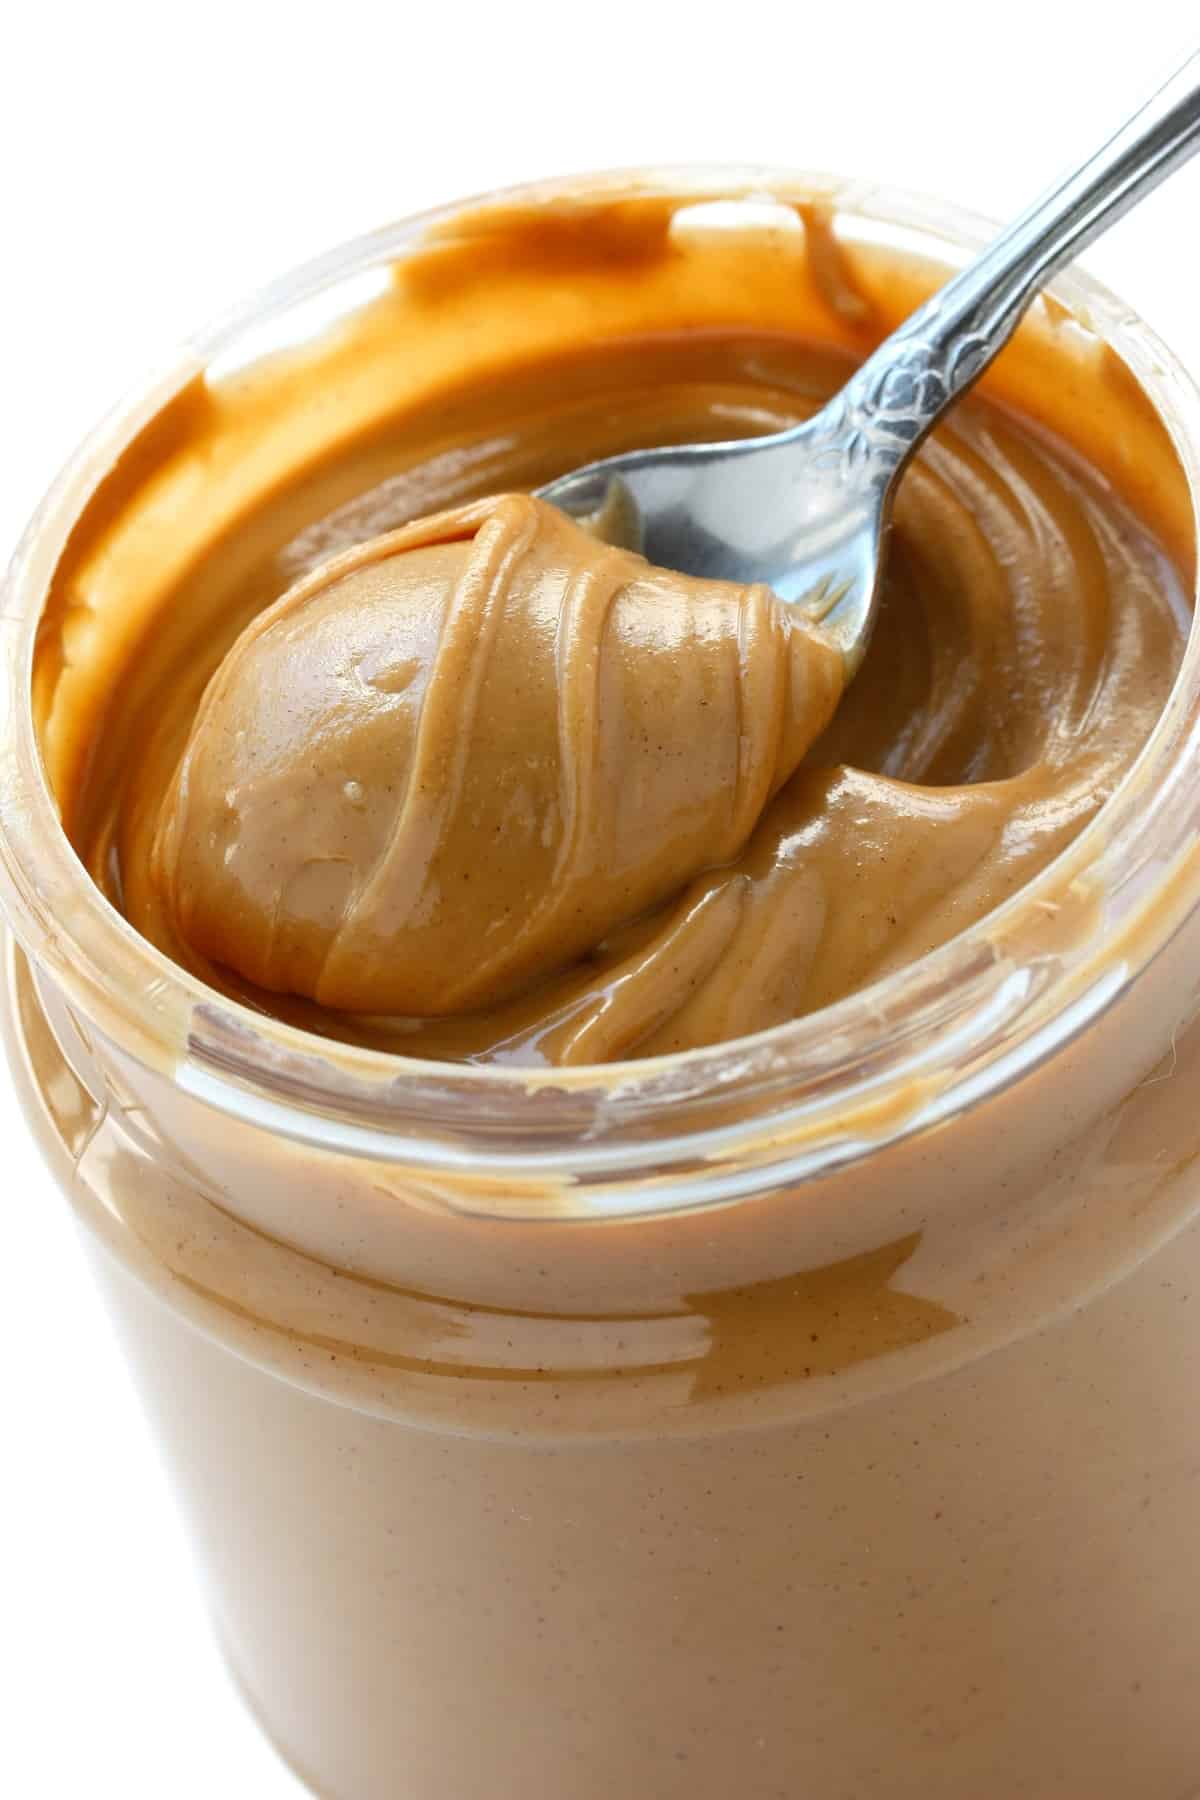 Peanut butter in jar with spoon.